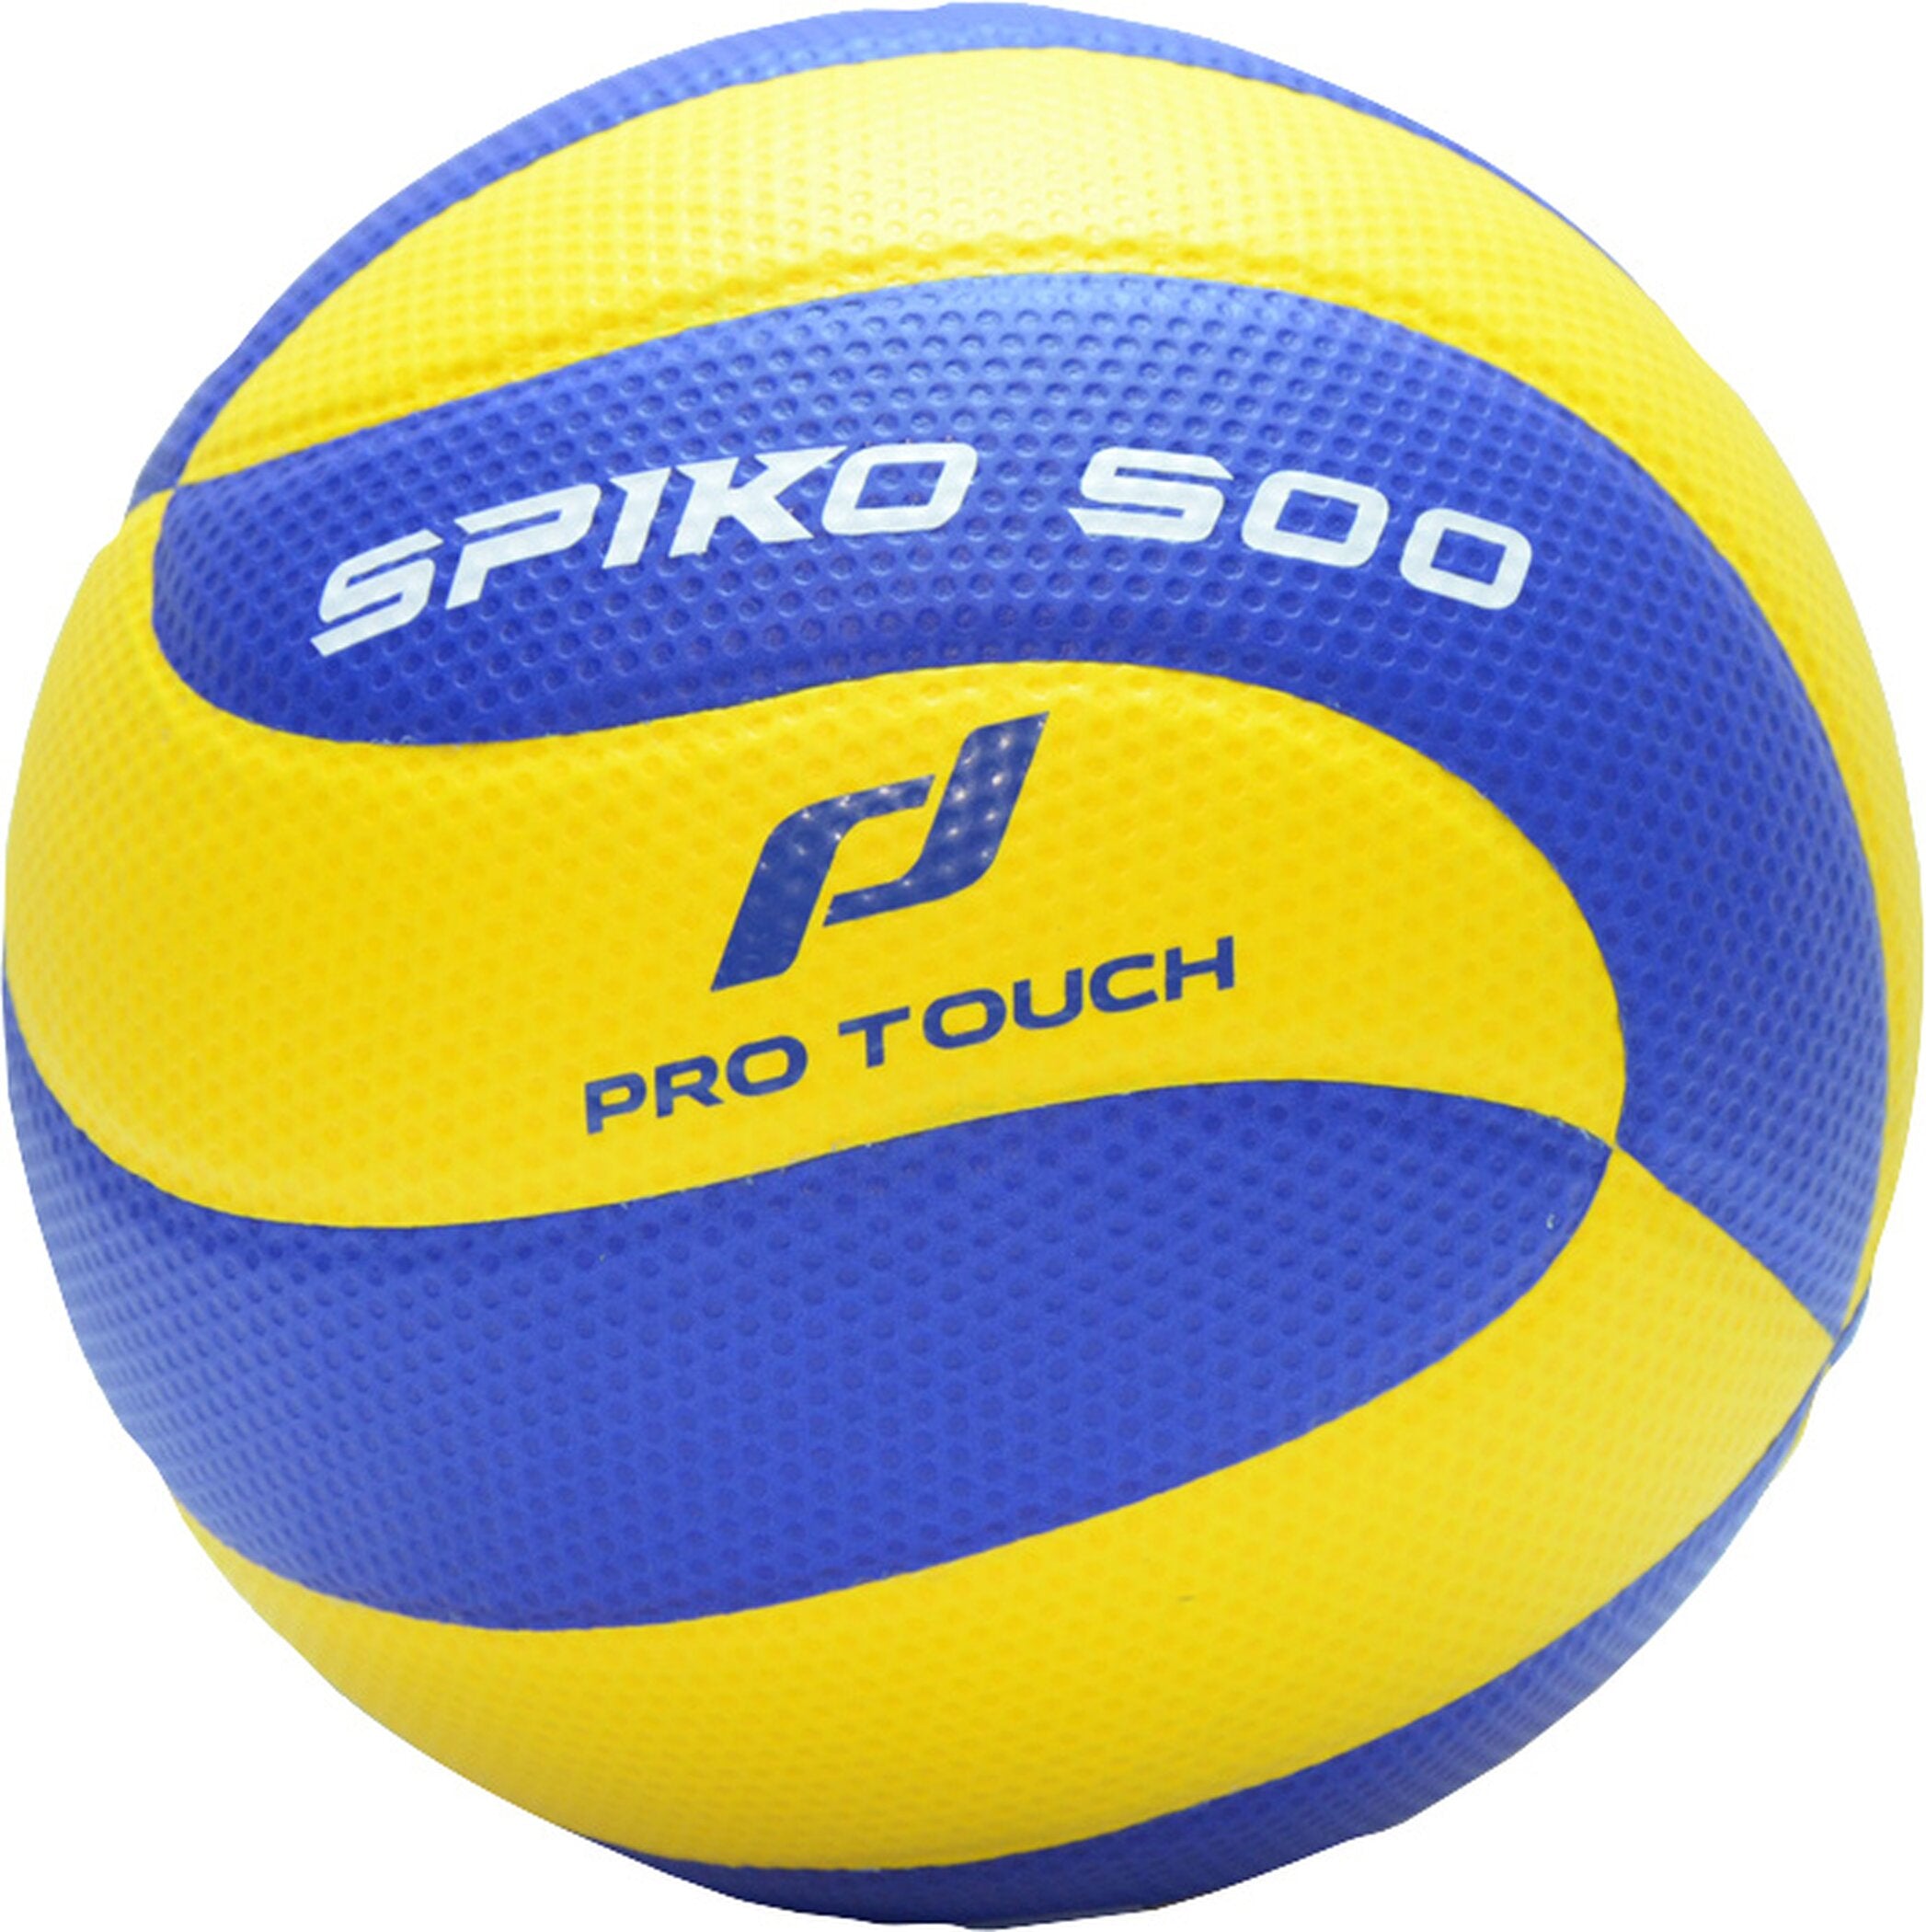 Volleyball SPIKO 500